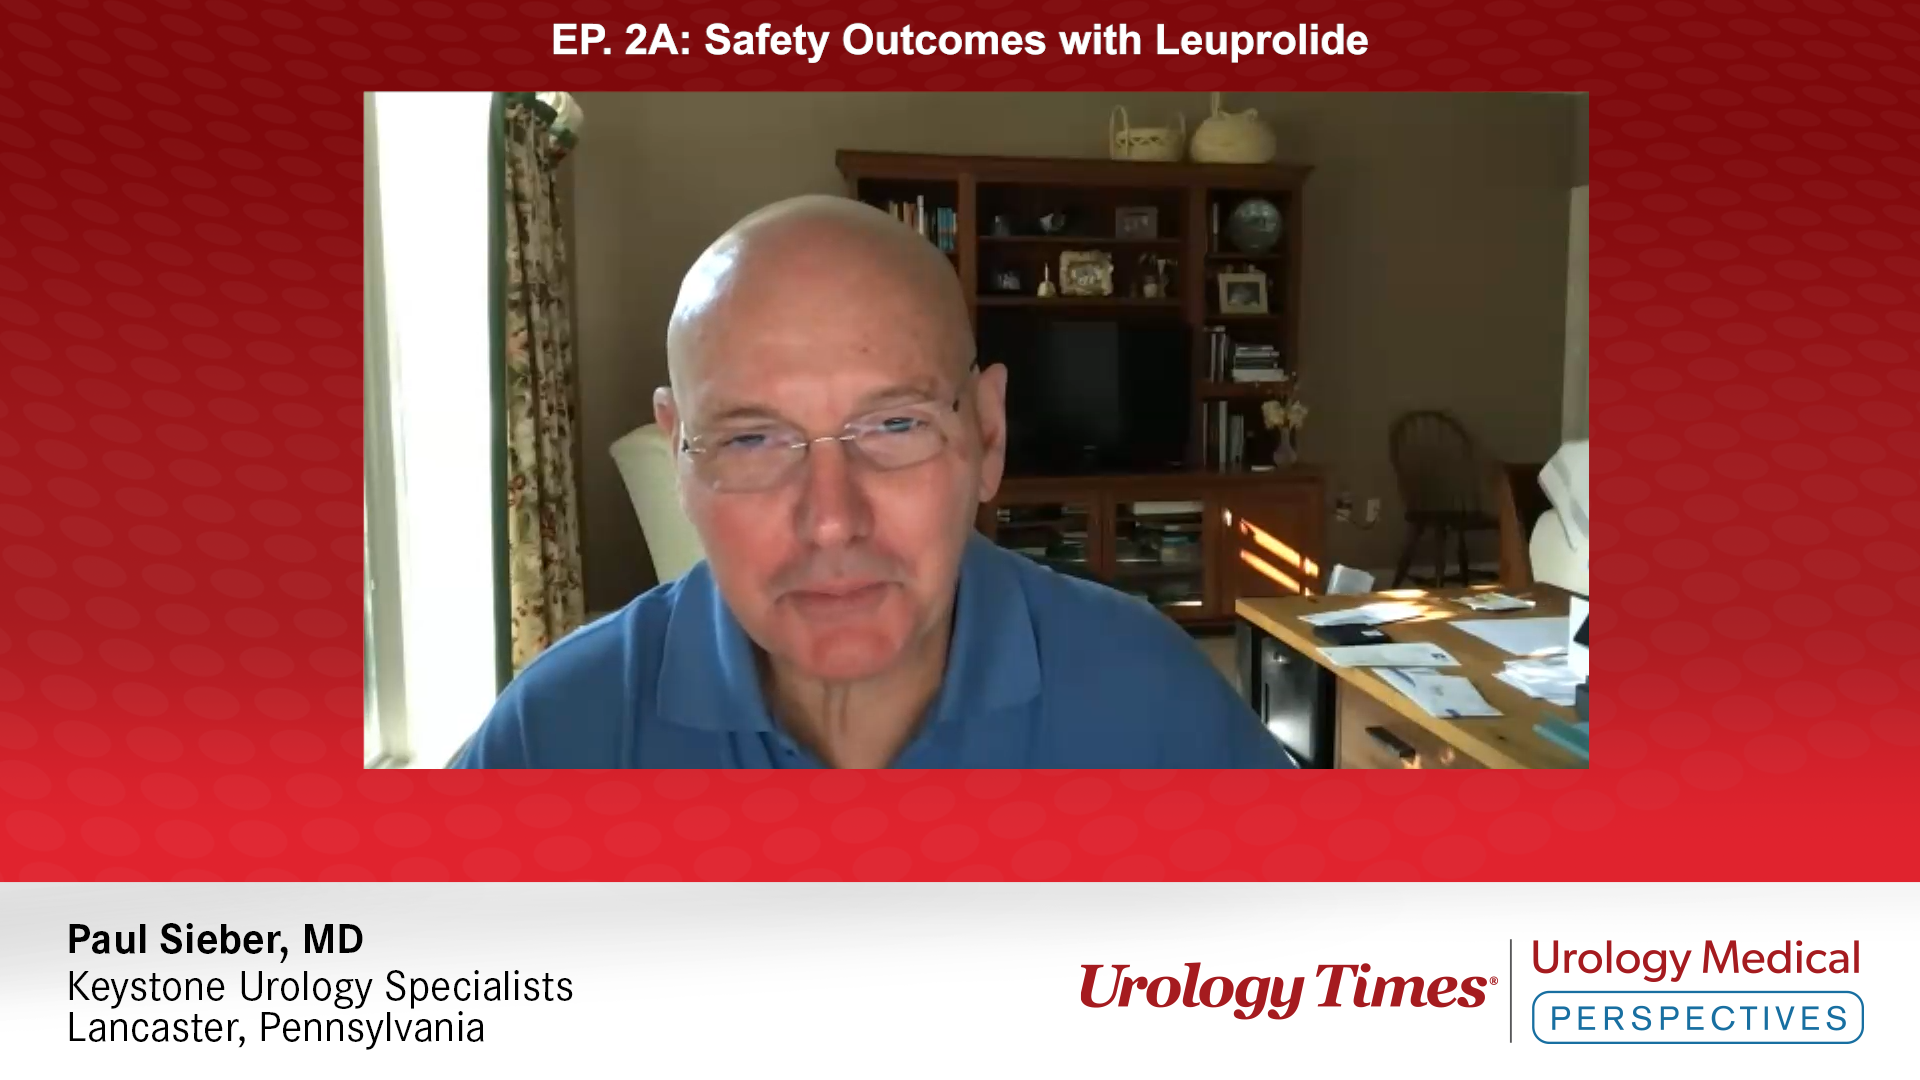 Safety Outcomes with Leuprolide